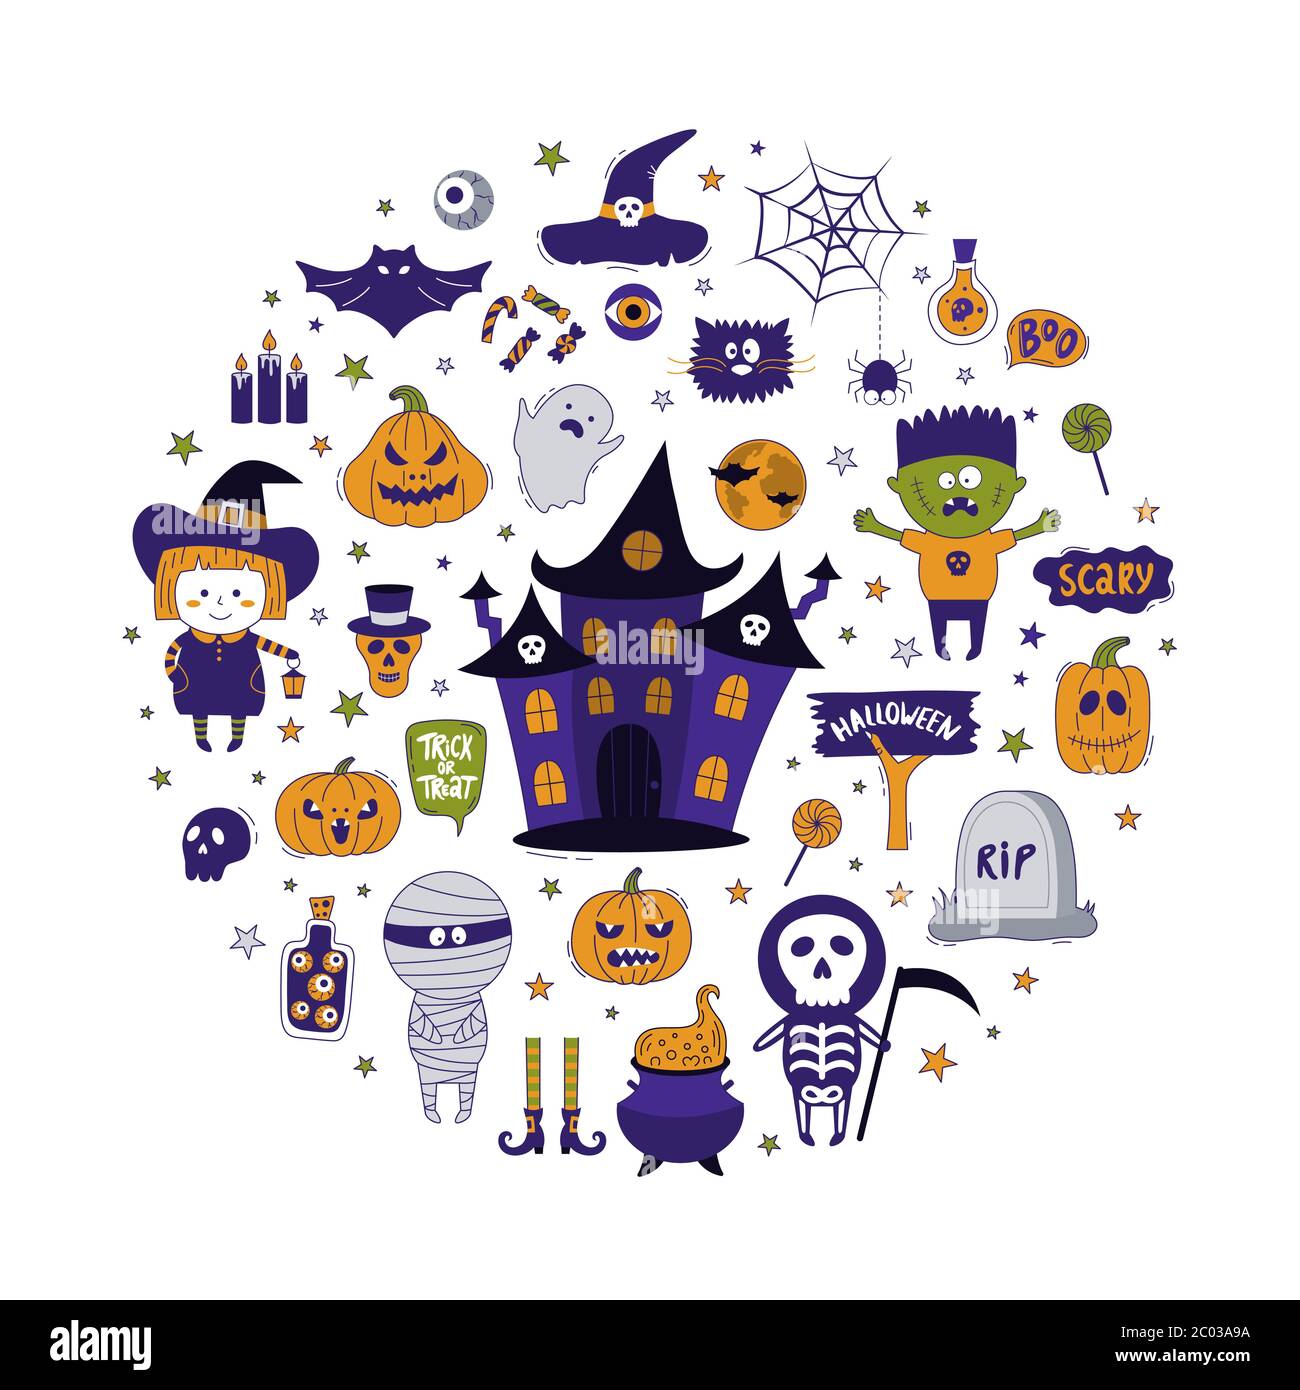 Halloween round objects collection. Hand-drawn vector concept with pumpkins, tombstone, skull, mummy, witch, ghost house, monster, etc. It can be used Stock Vector